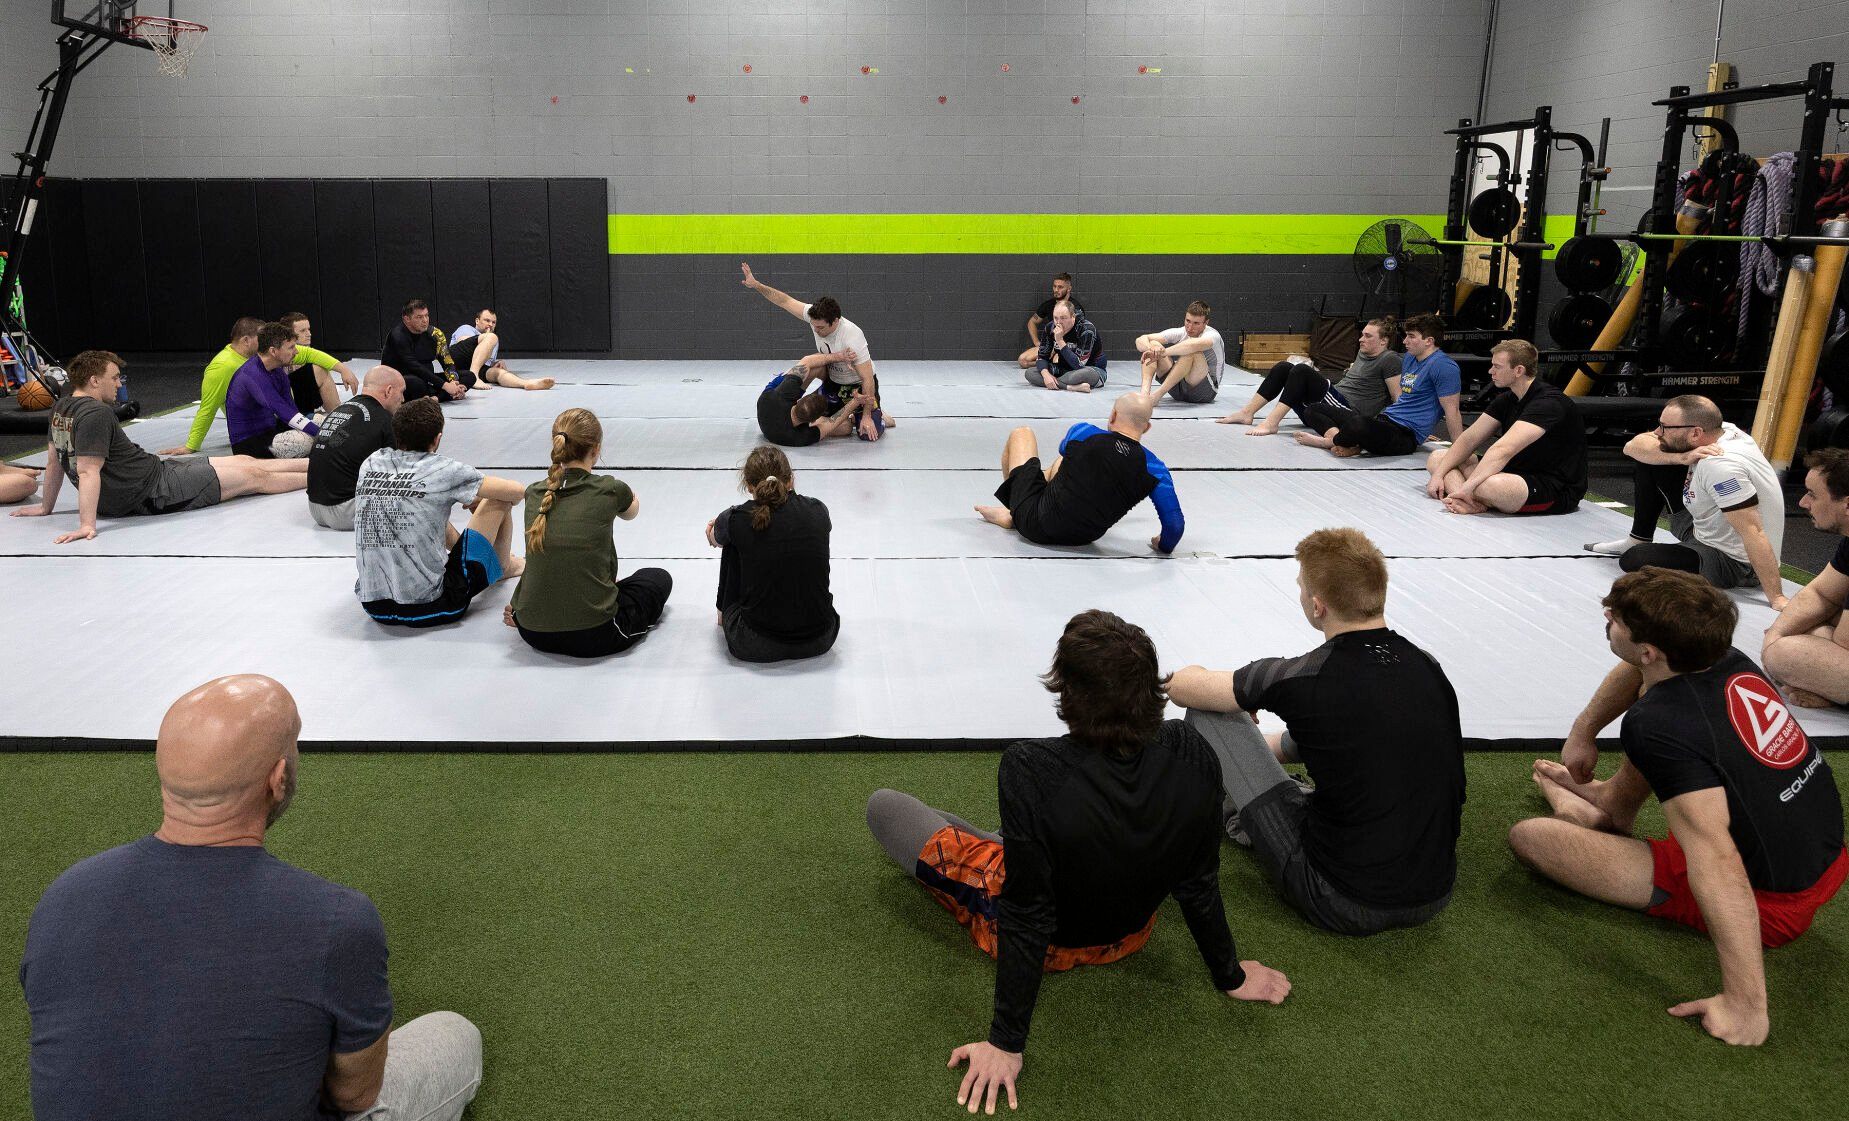 Dubuque Brazilian Jiu-Jitsu owner Willie Doyle teaches a class at Volv Fitness in Dubuque on Monday, March 27, 2023.    PHOTO CREDIT: Stephen Gassman